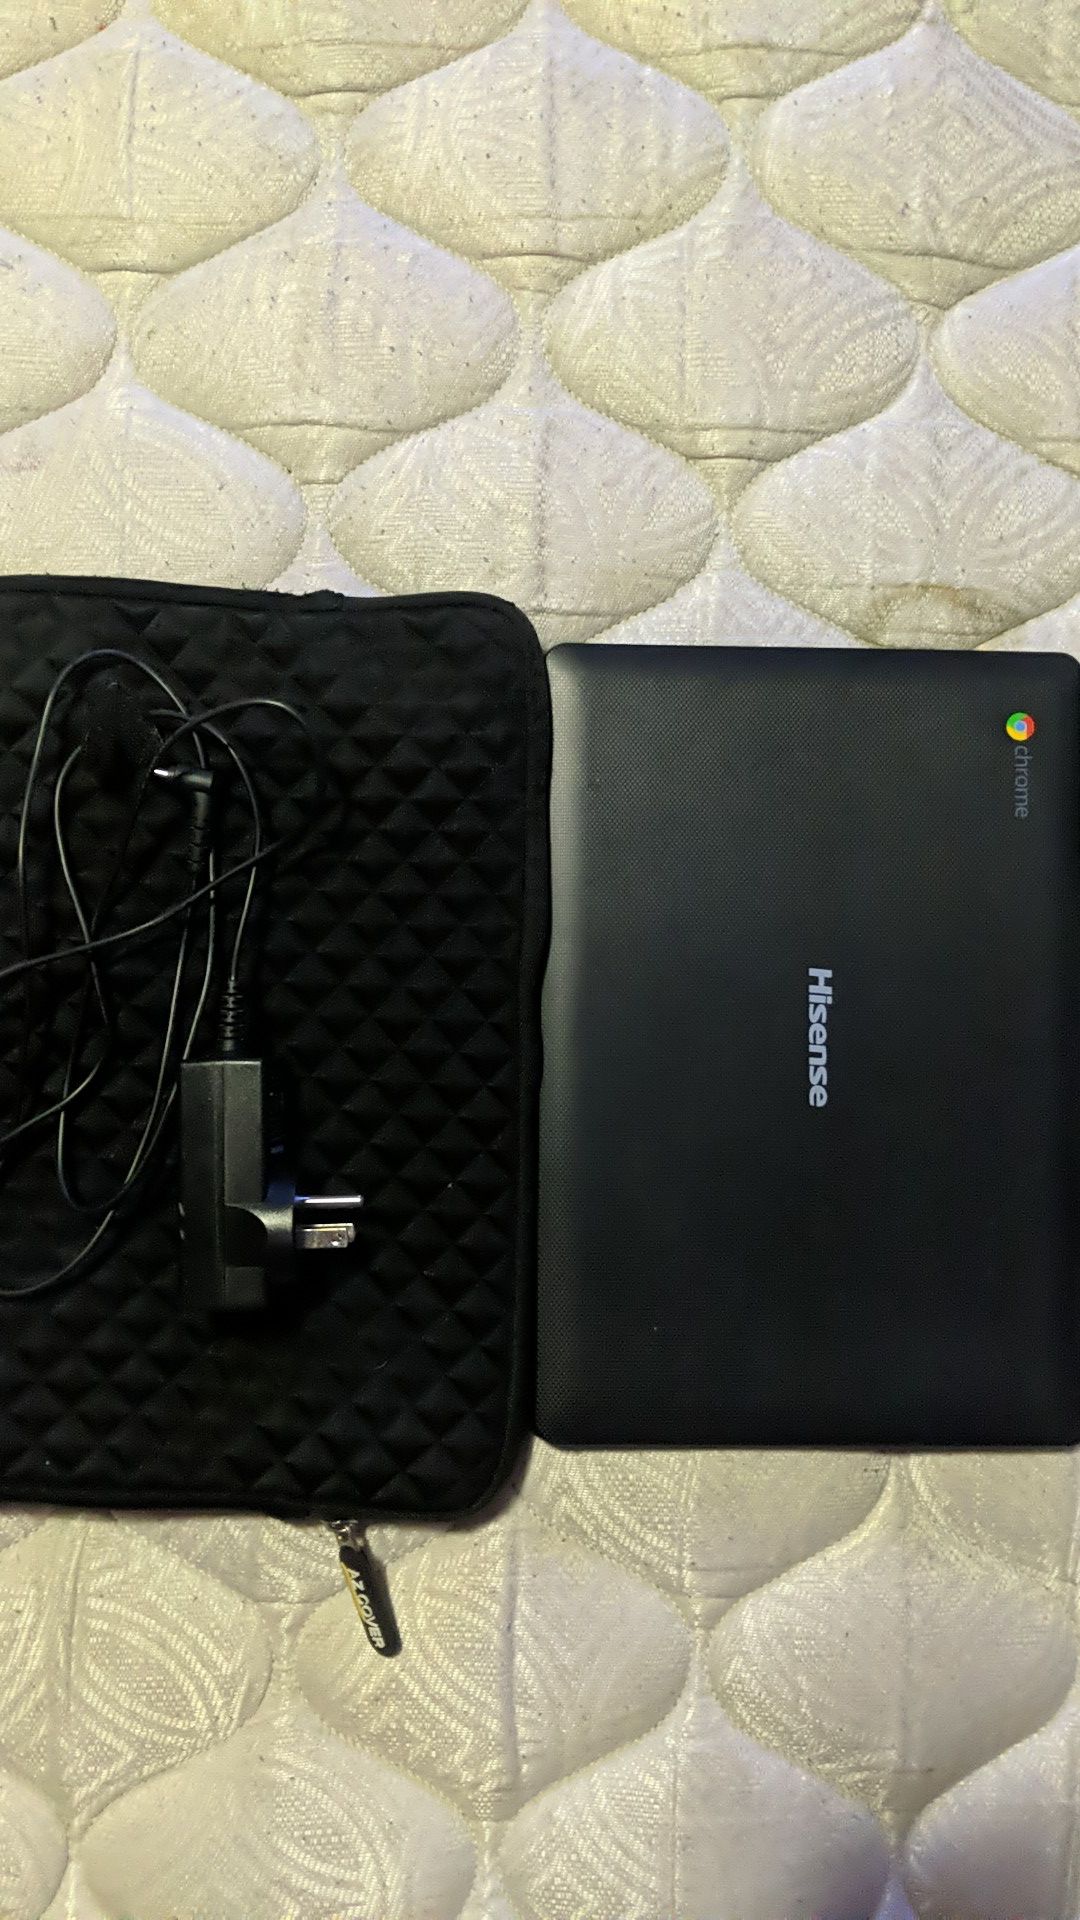 Hisense Chromebook w case and charger